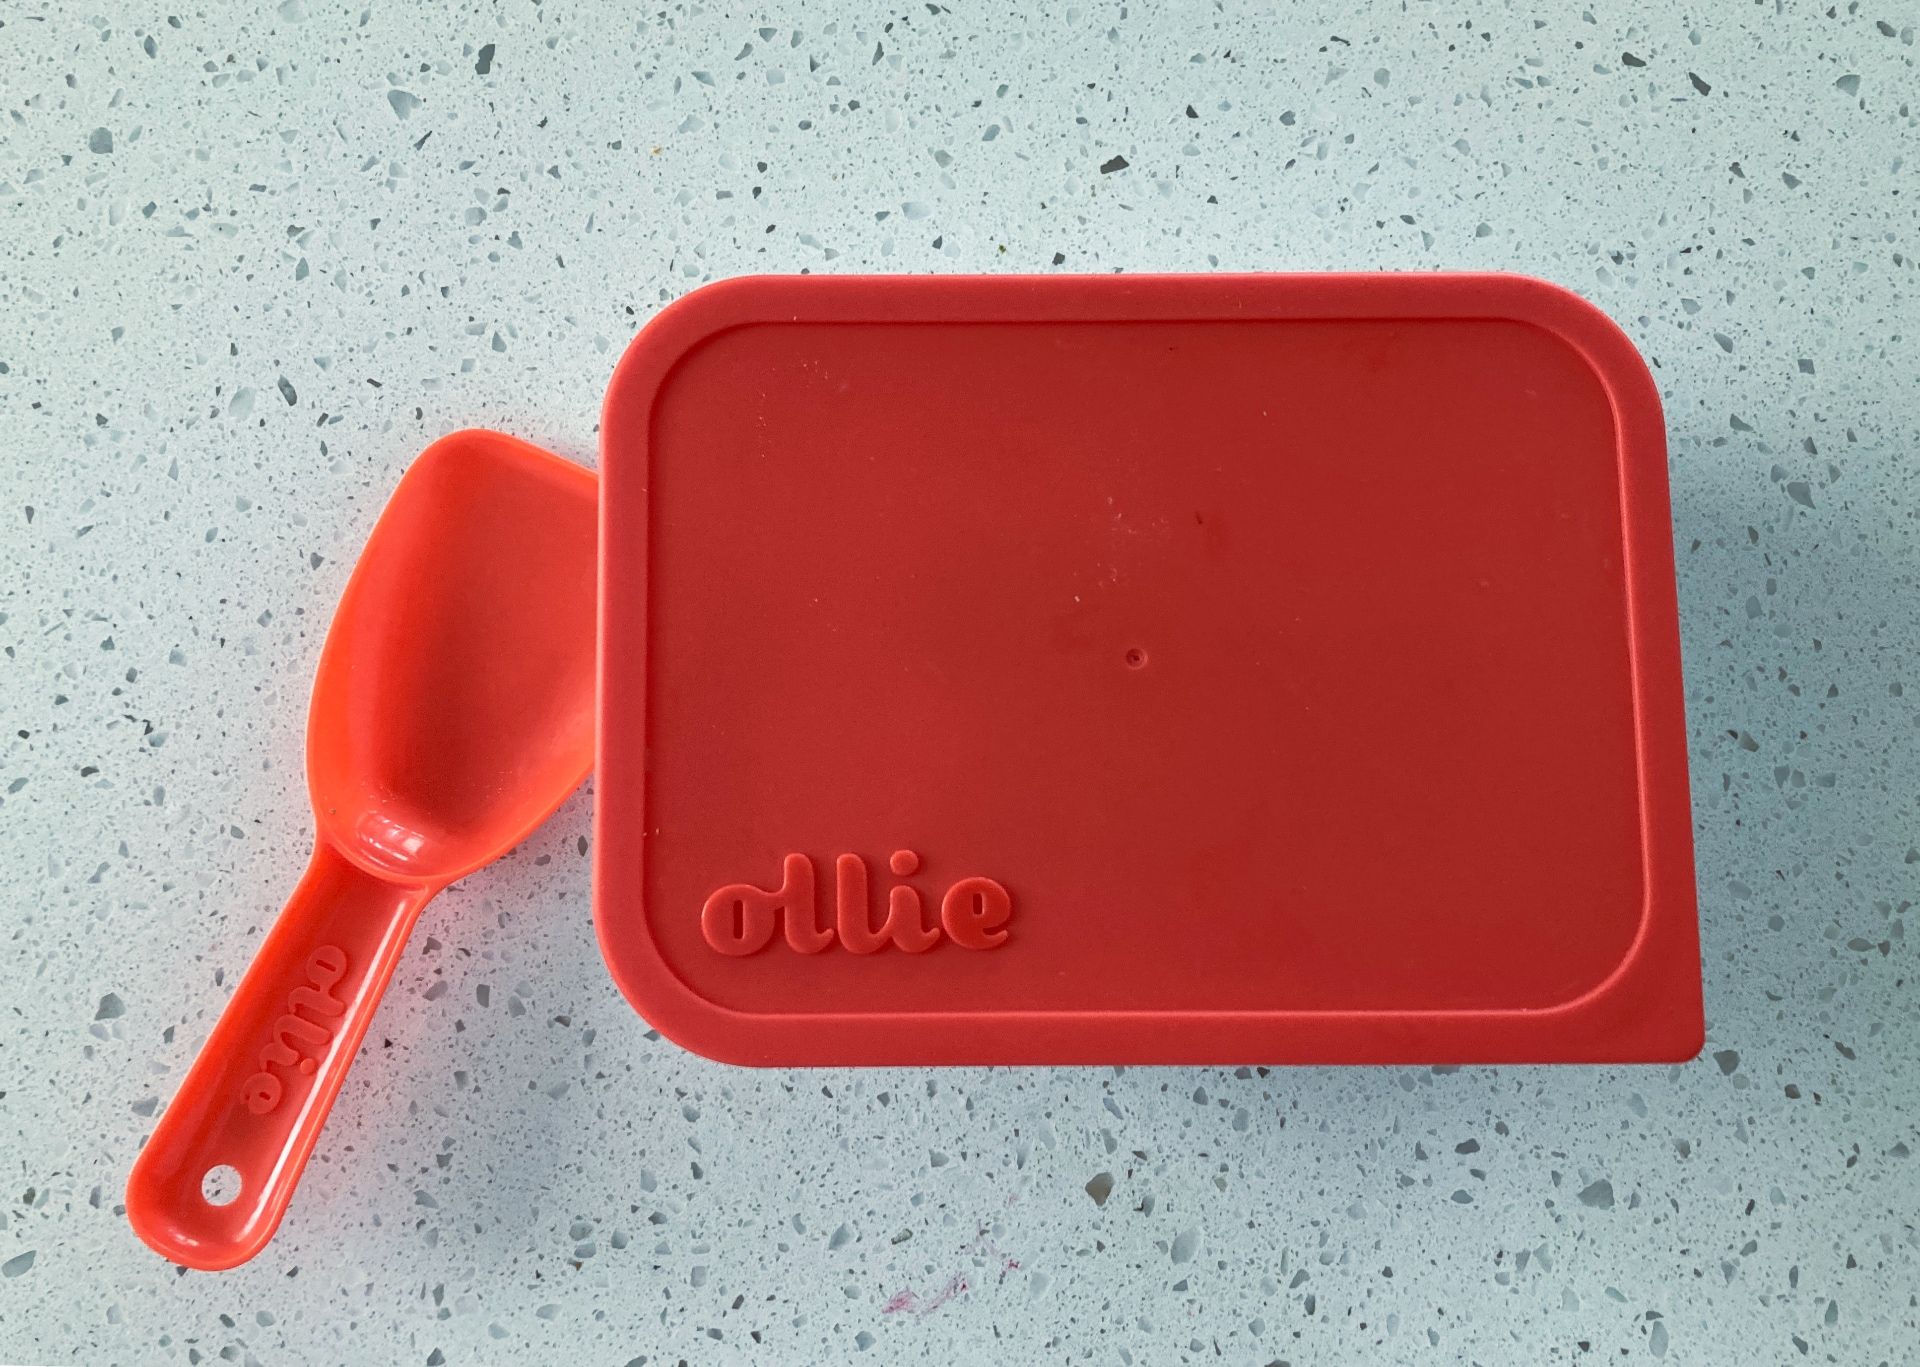 The handy plastic container and scoop included with Ollie dog food delivery.